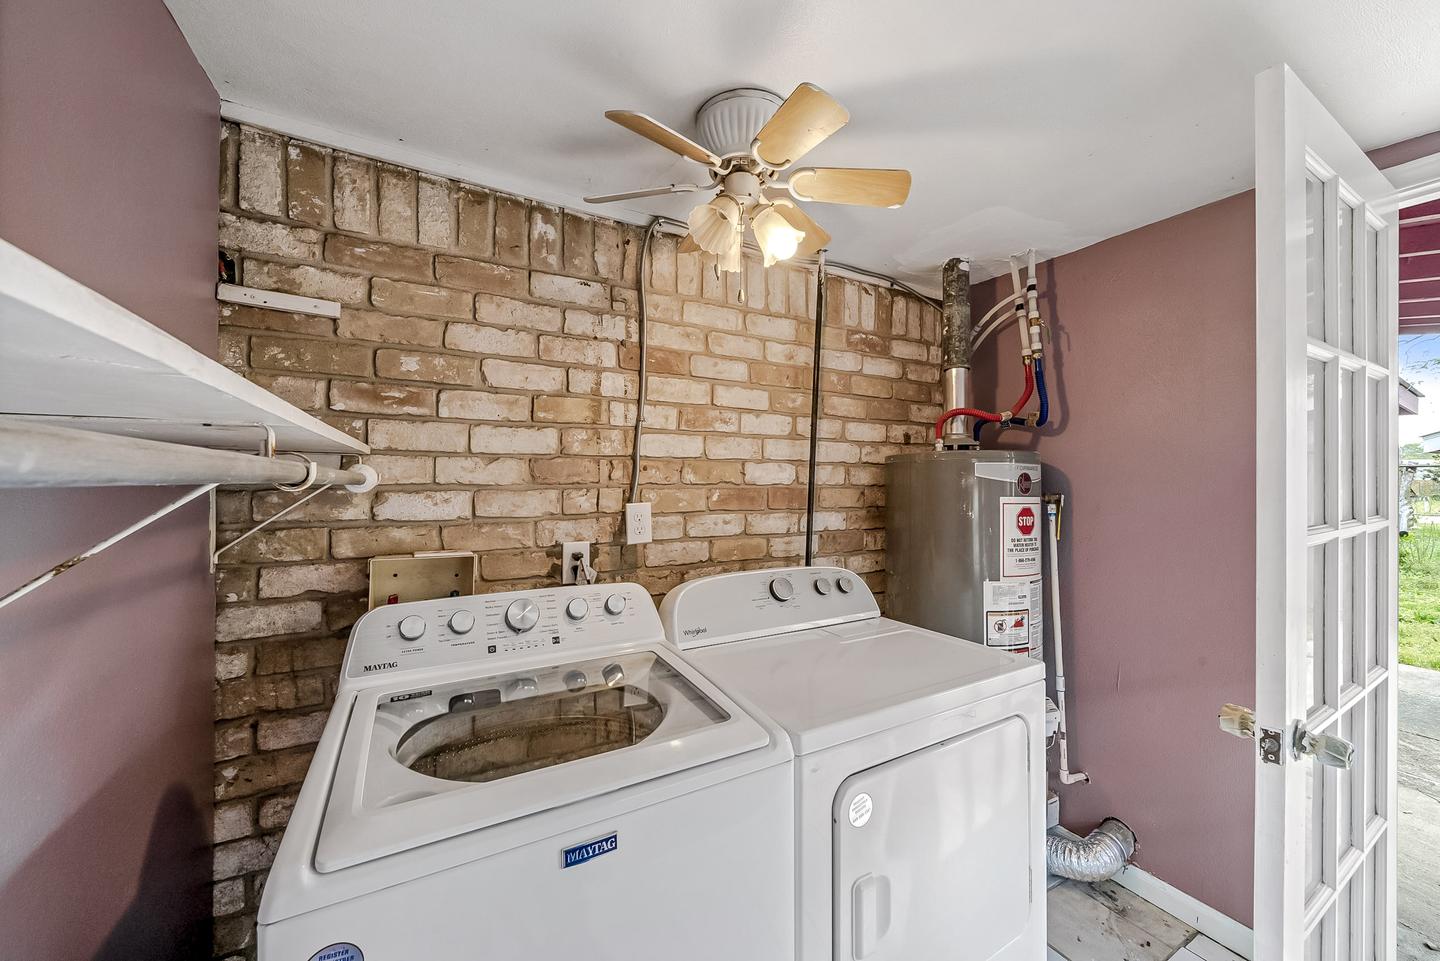 Laundry area is closed off from the rest of the home making the home quiet and comfortable. Accessed by a lighted walkway.